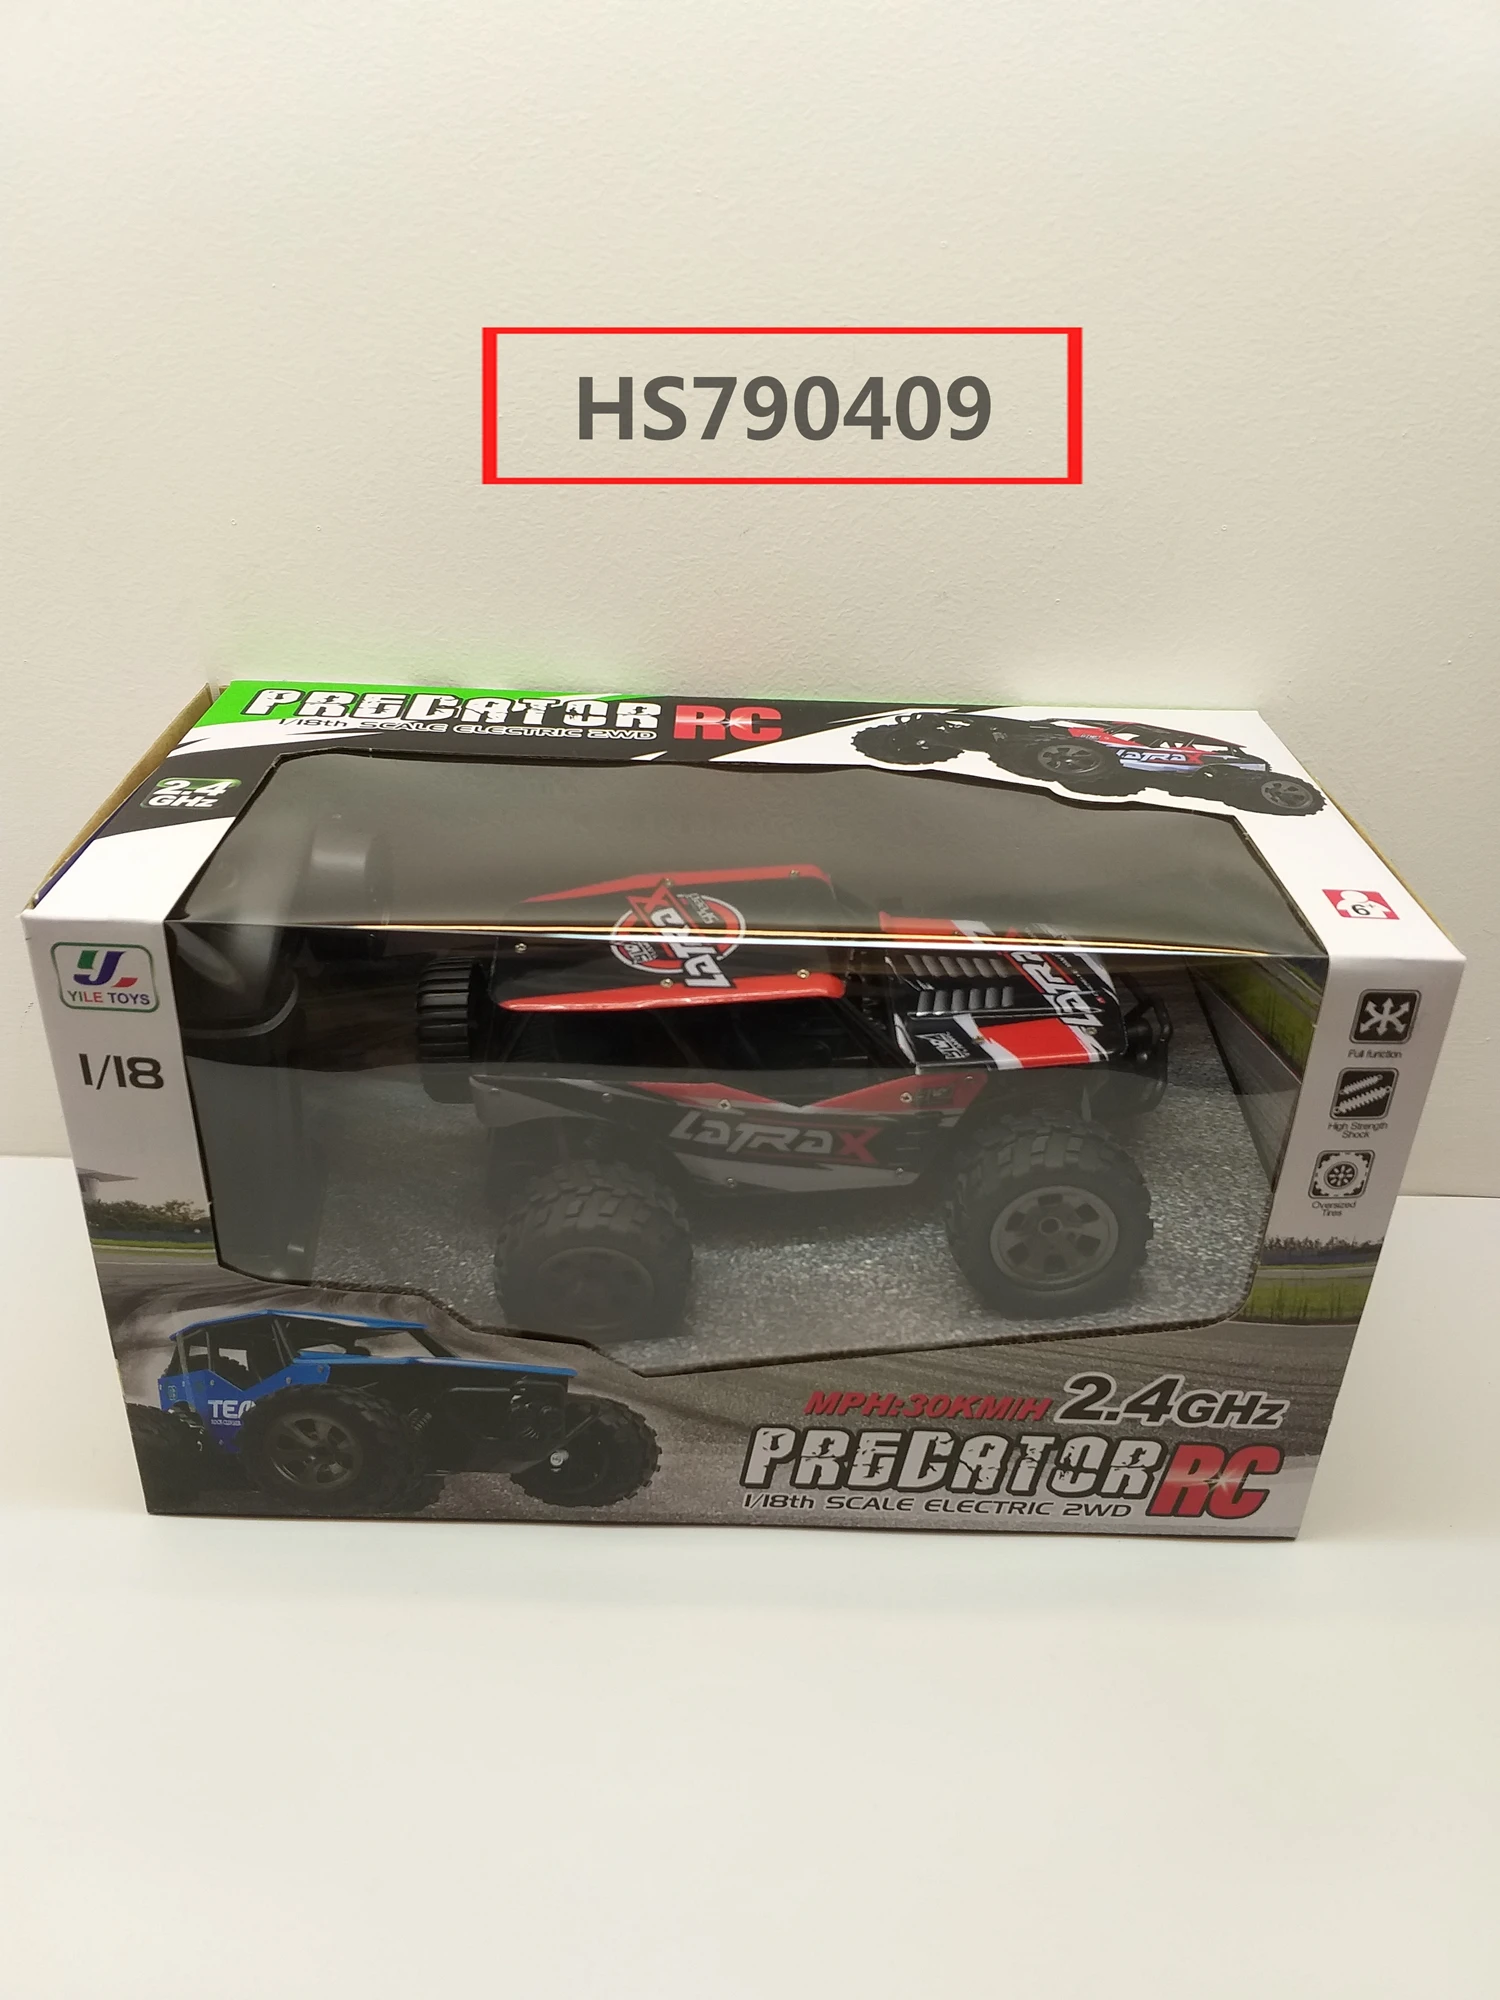 HS790409, Huwsin Toys, 1:18 2.4G RC Car,red/blue/green 3color mixed, Crawlers Off Road Vehicle Toy Remote Control Car